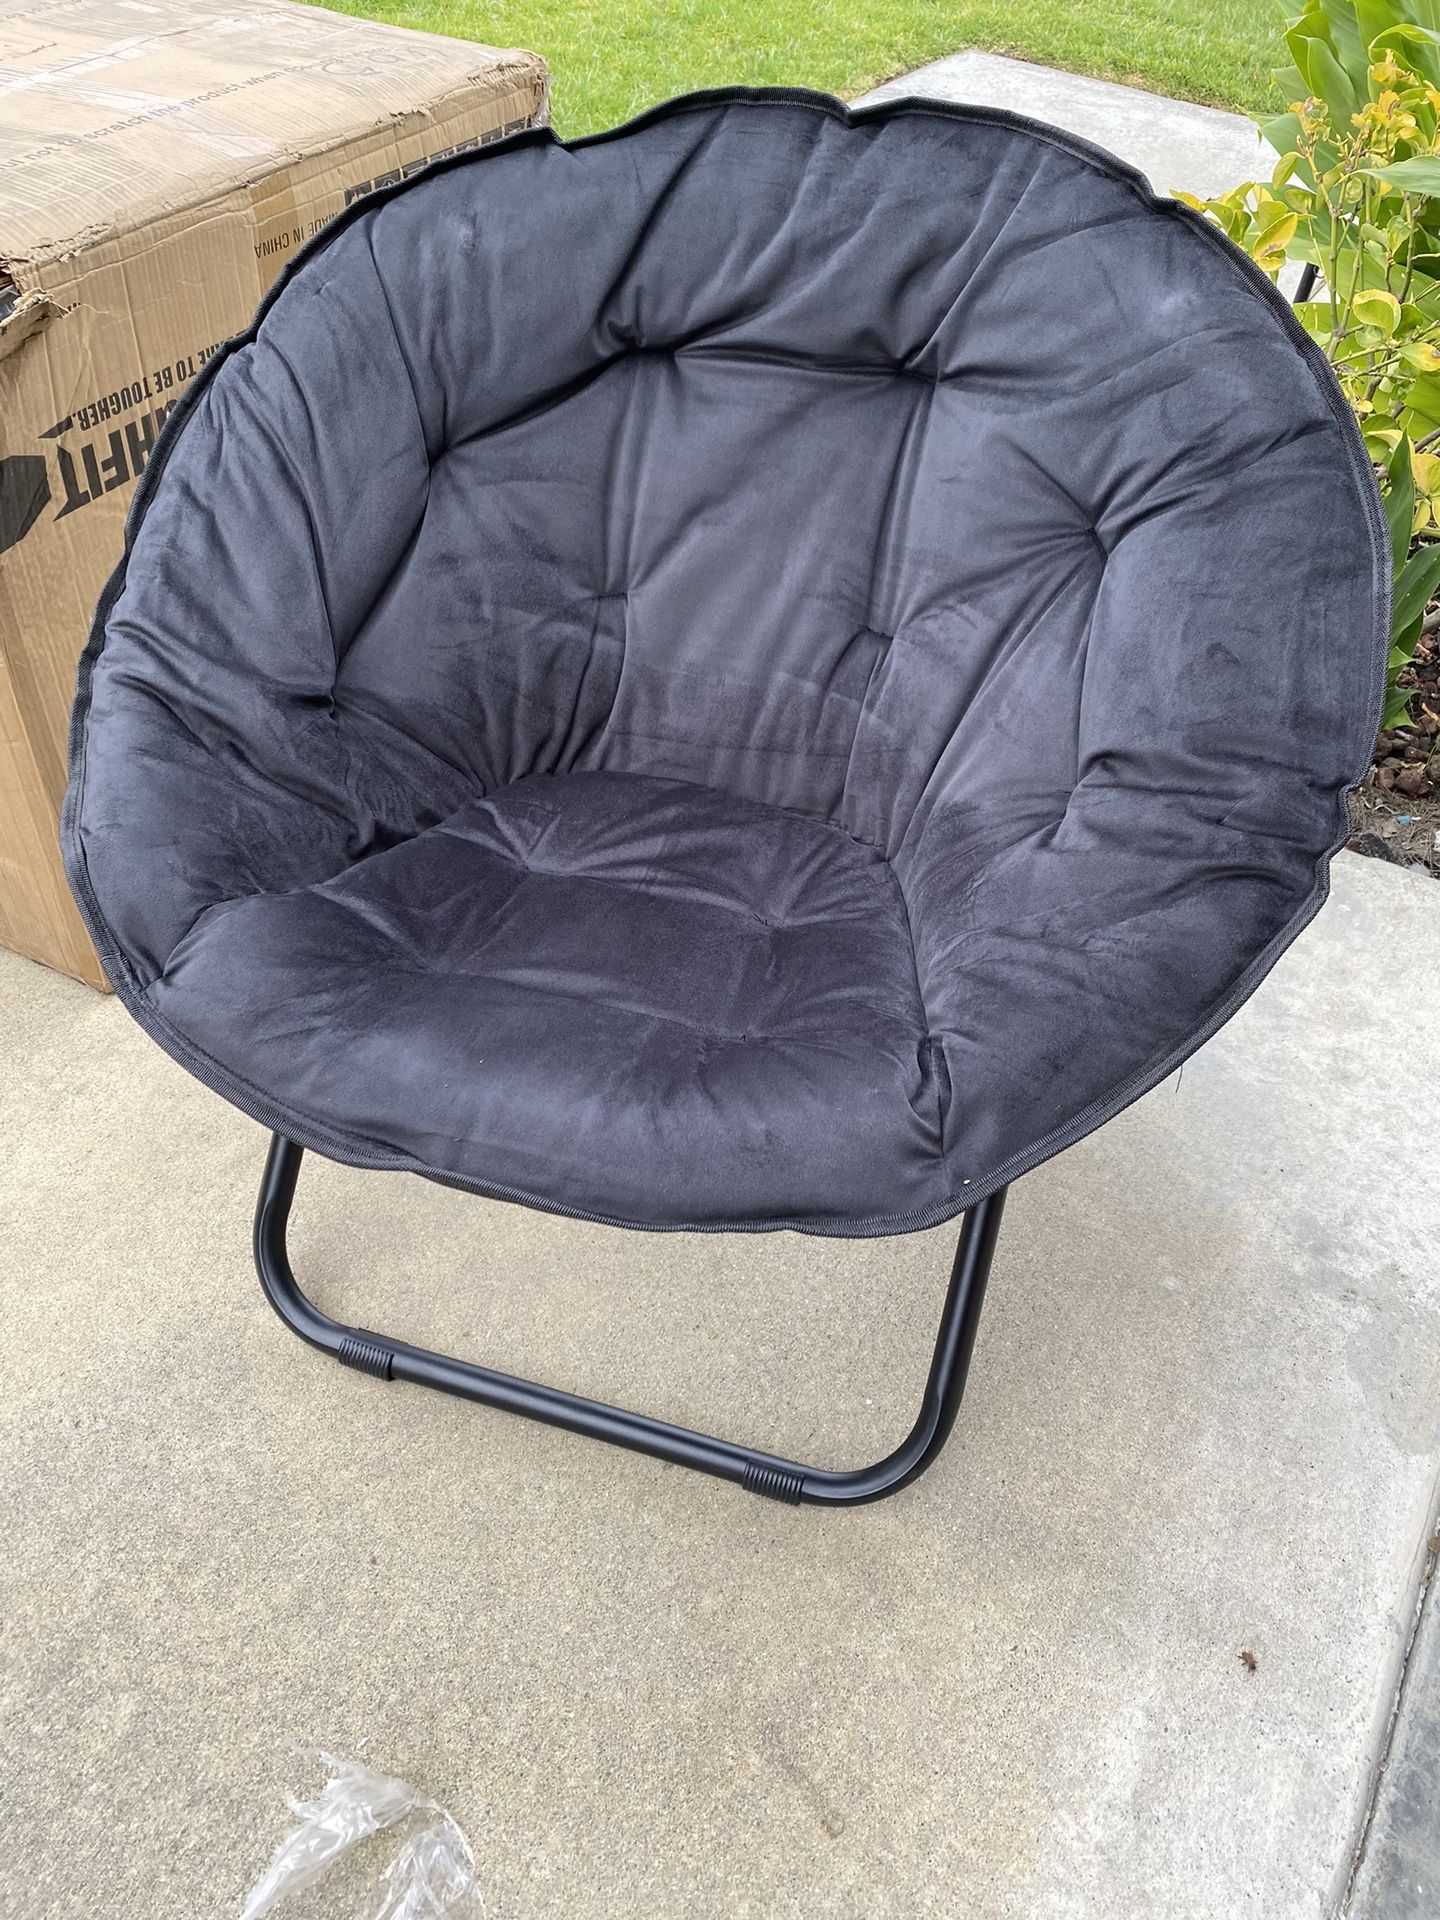 New Saucer Chair Comfy for Bedroom Dorm Living Room Reading - Faux Fur Round Chair for Teens with Folding Metal Frame (Black,23.6"×22"×29.5")